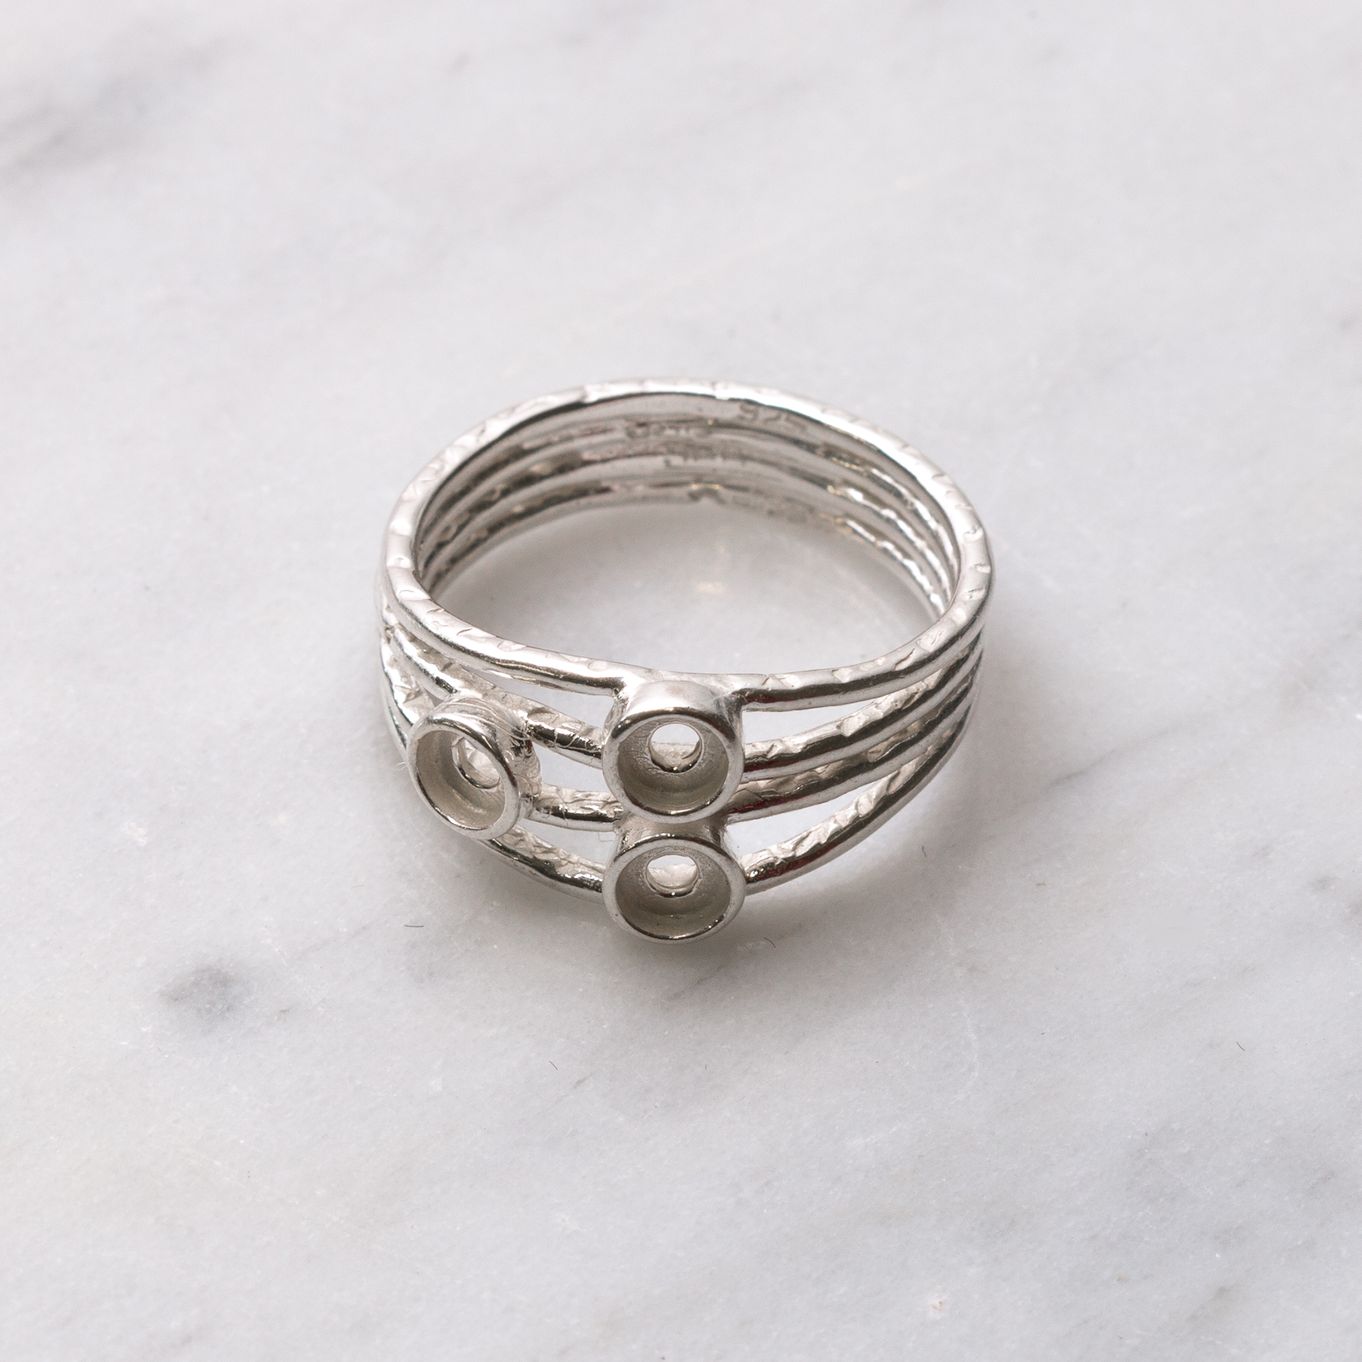 Sterling Silver Ring with Plain Bezel Cups For 3mm Cabochon Stones